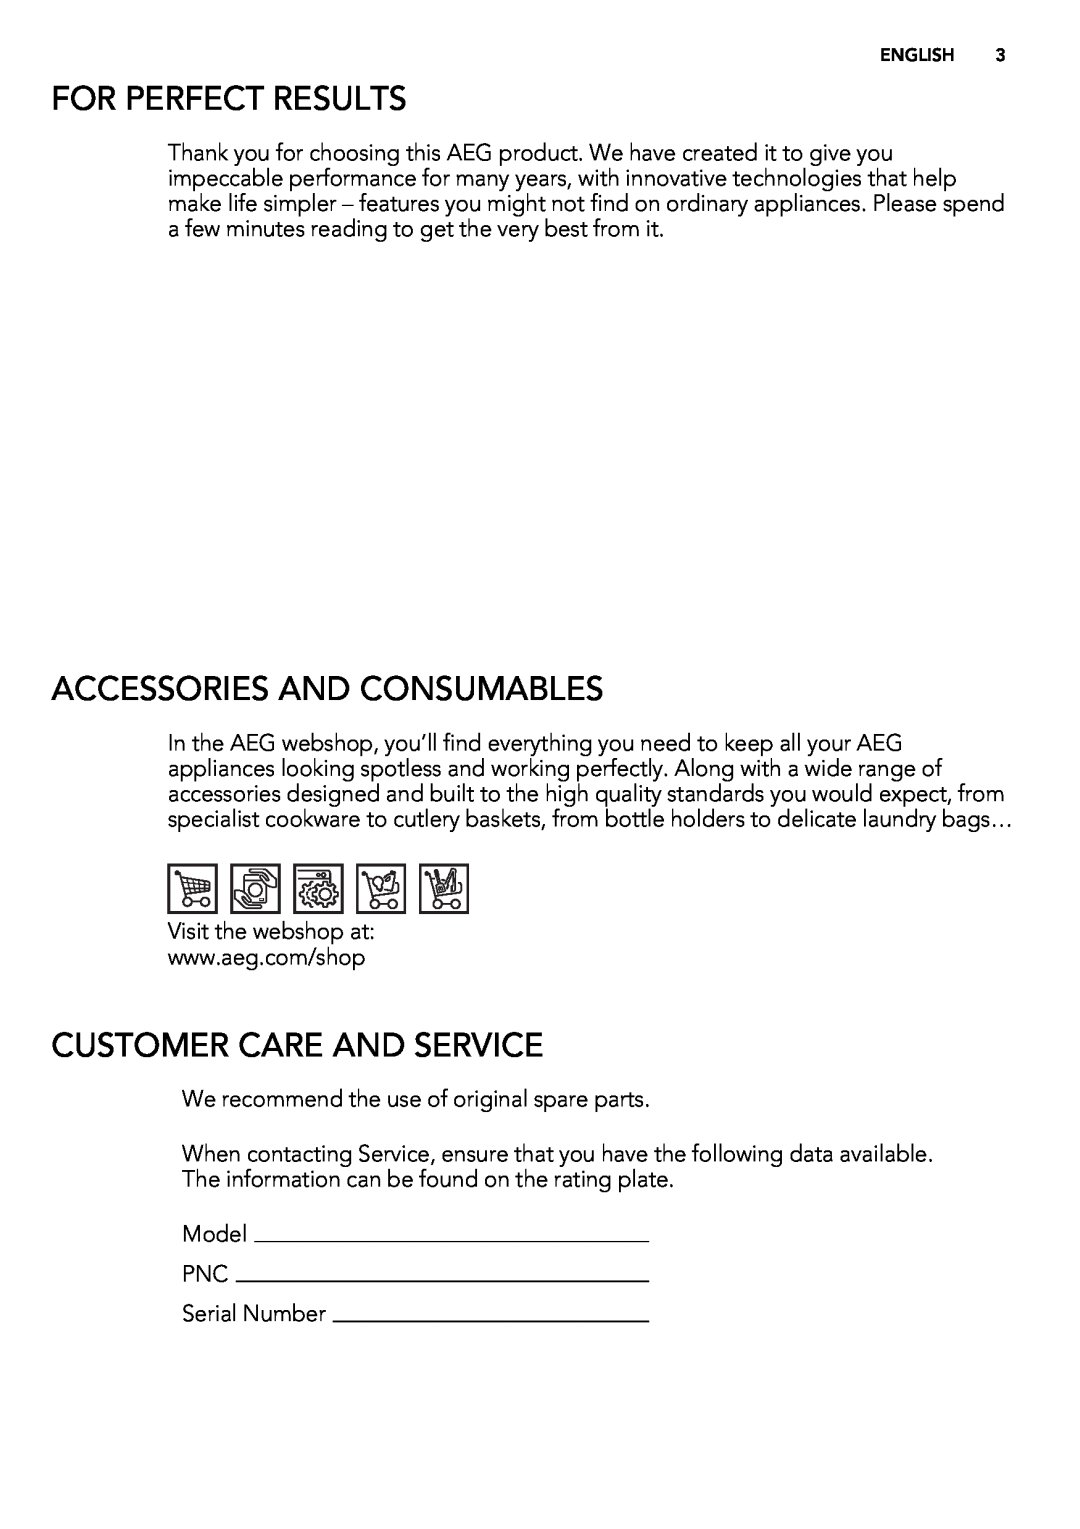 AEG 88060 user manual For Perfect Results, Accessories And Consumables, Customer Care And Service 